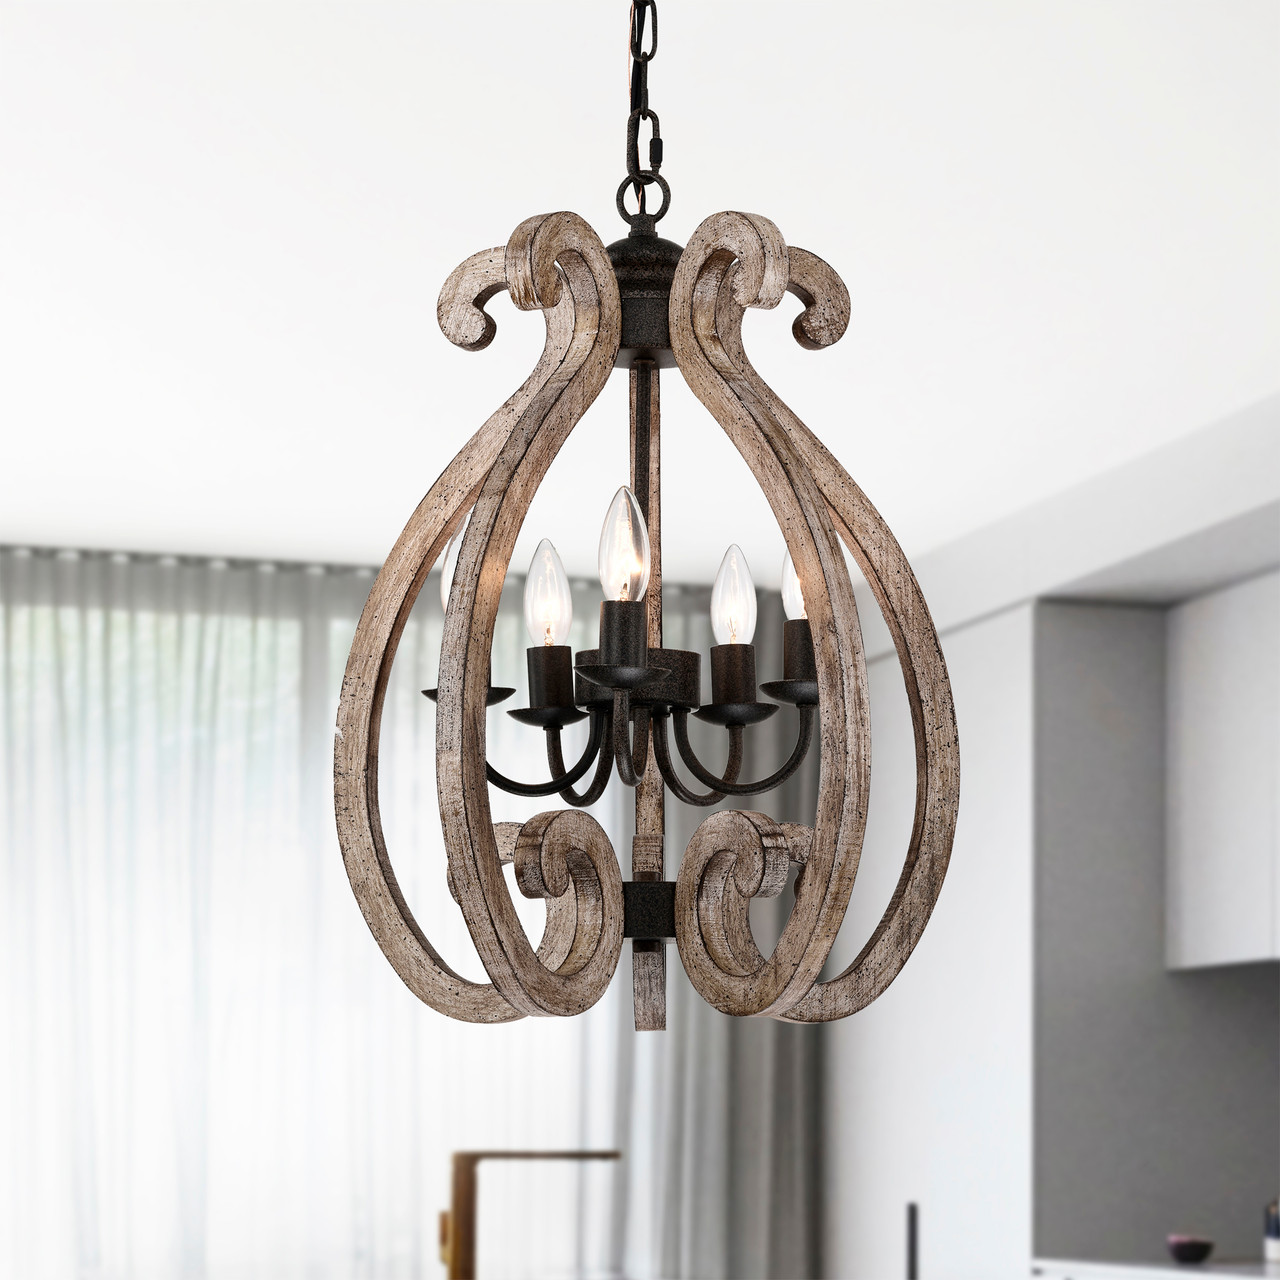 WAREHOUSE OF TIFFANY'S PD039/6 Lina 17 in. 6-Light Indoor Rustic Brown and Faux Wood Grain Finish Chandelier with Light Kit